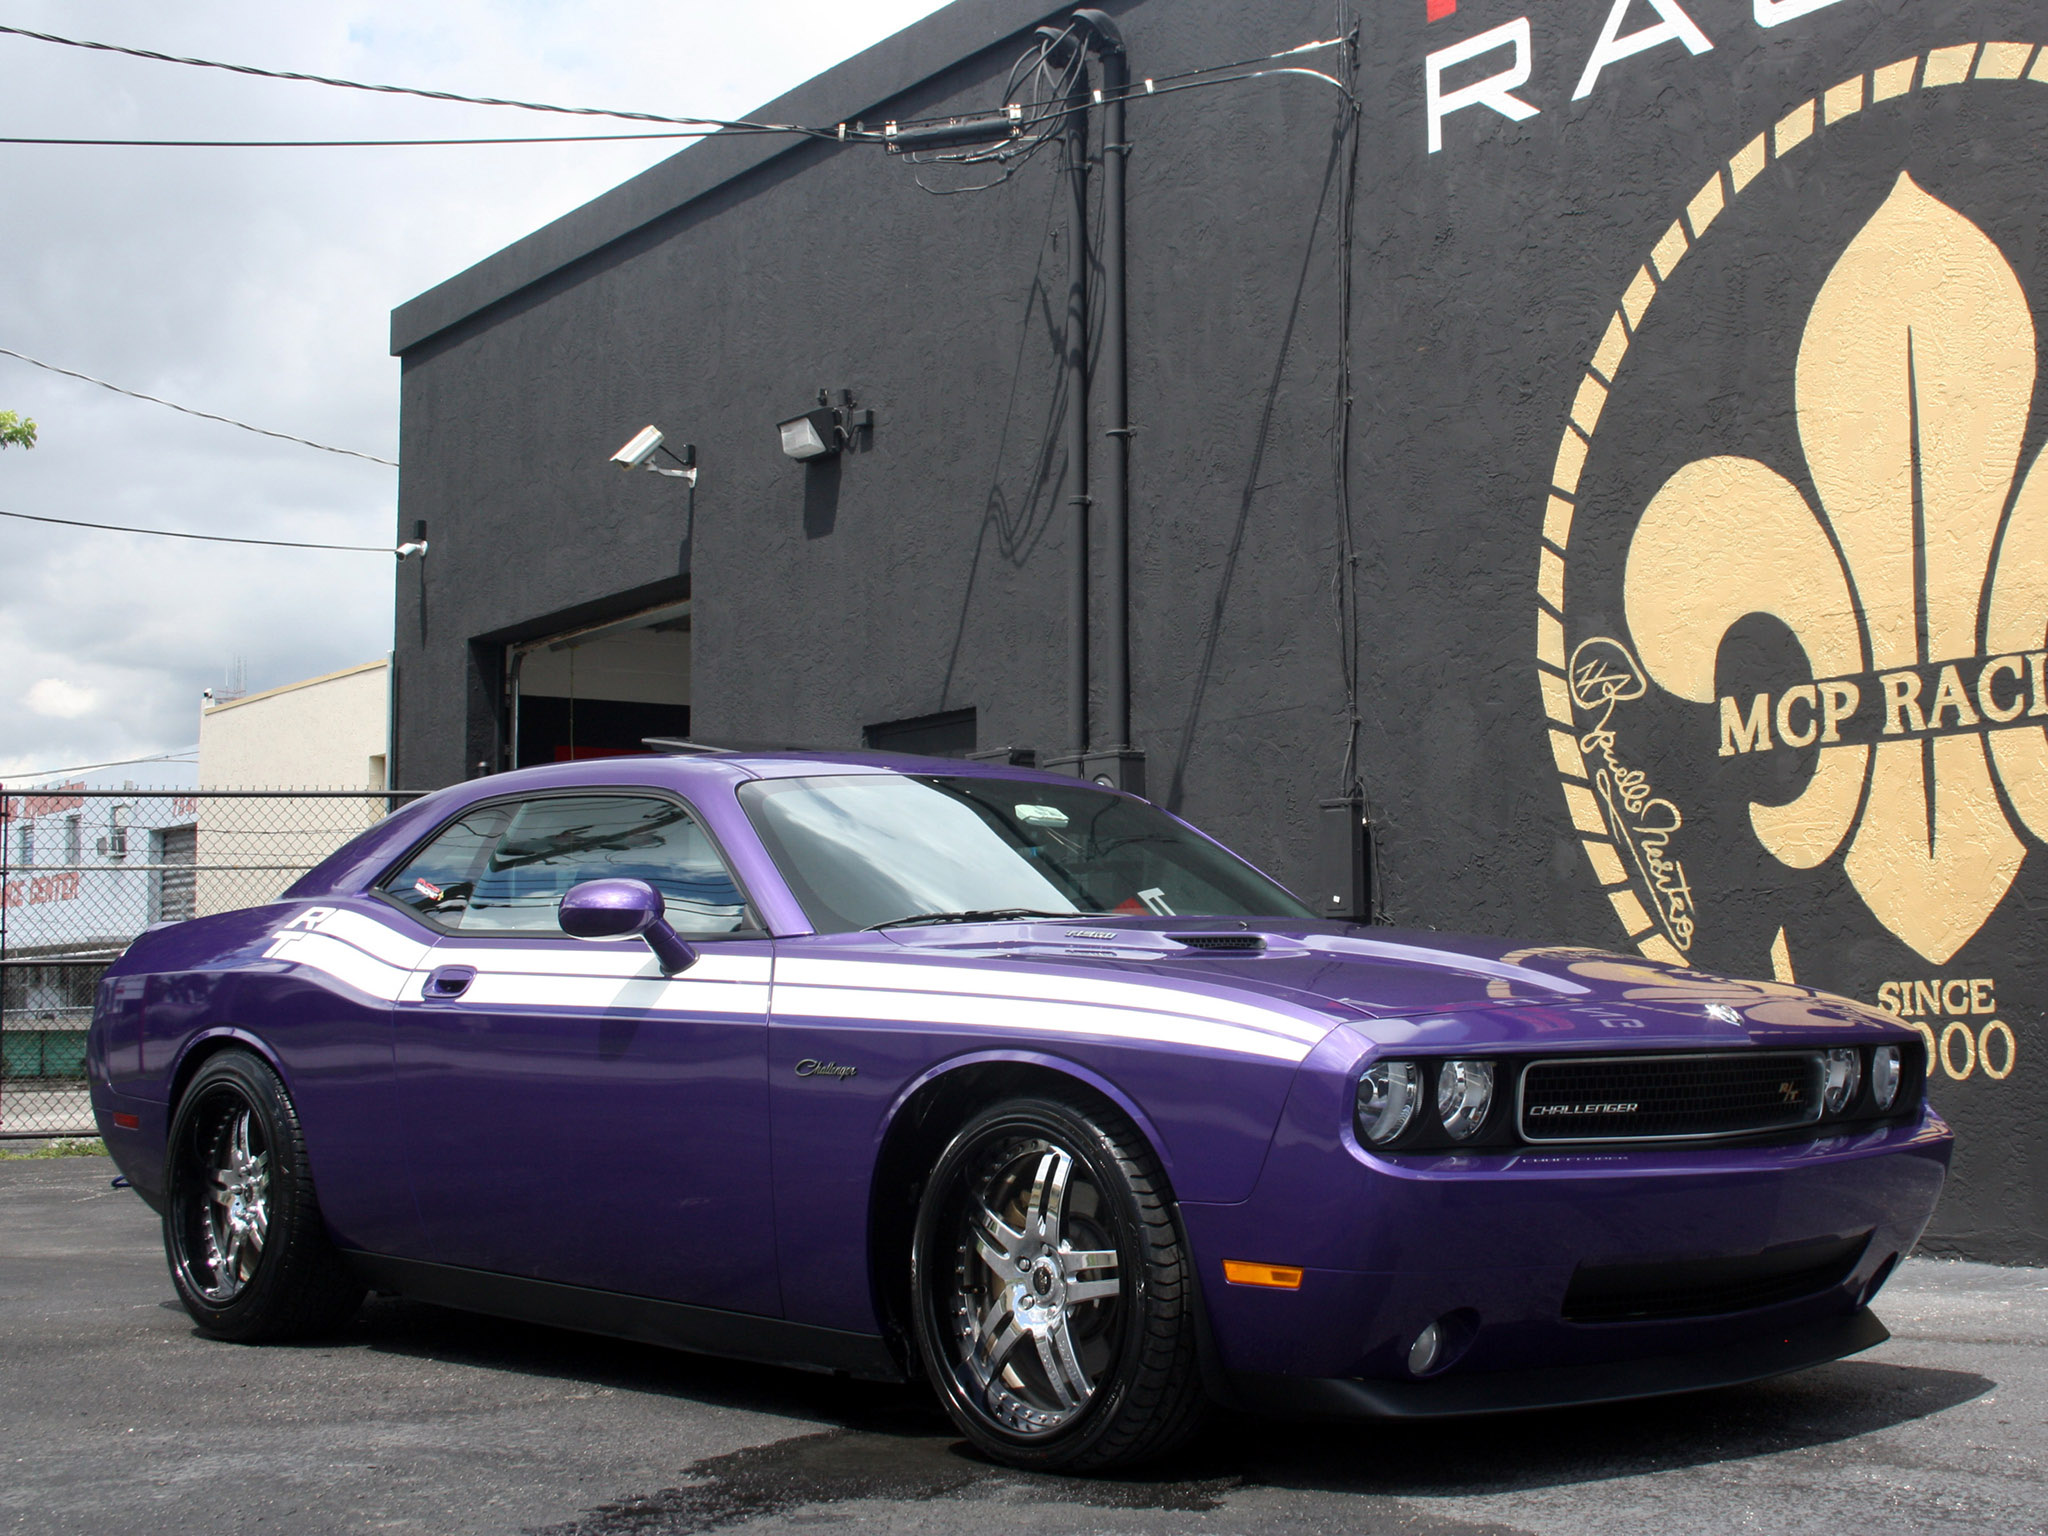 2009, Mcp racing, Dodge, Challenger, R t, Muscle, Supercar, Supercars Wallpaper